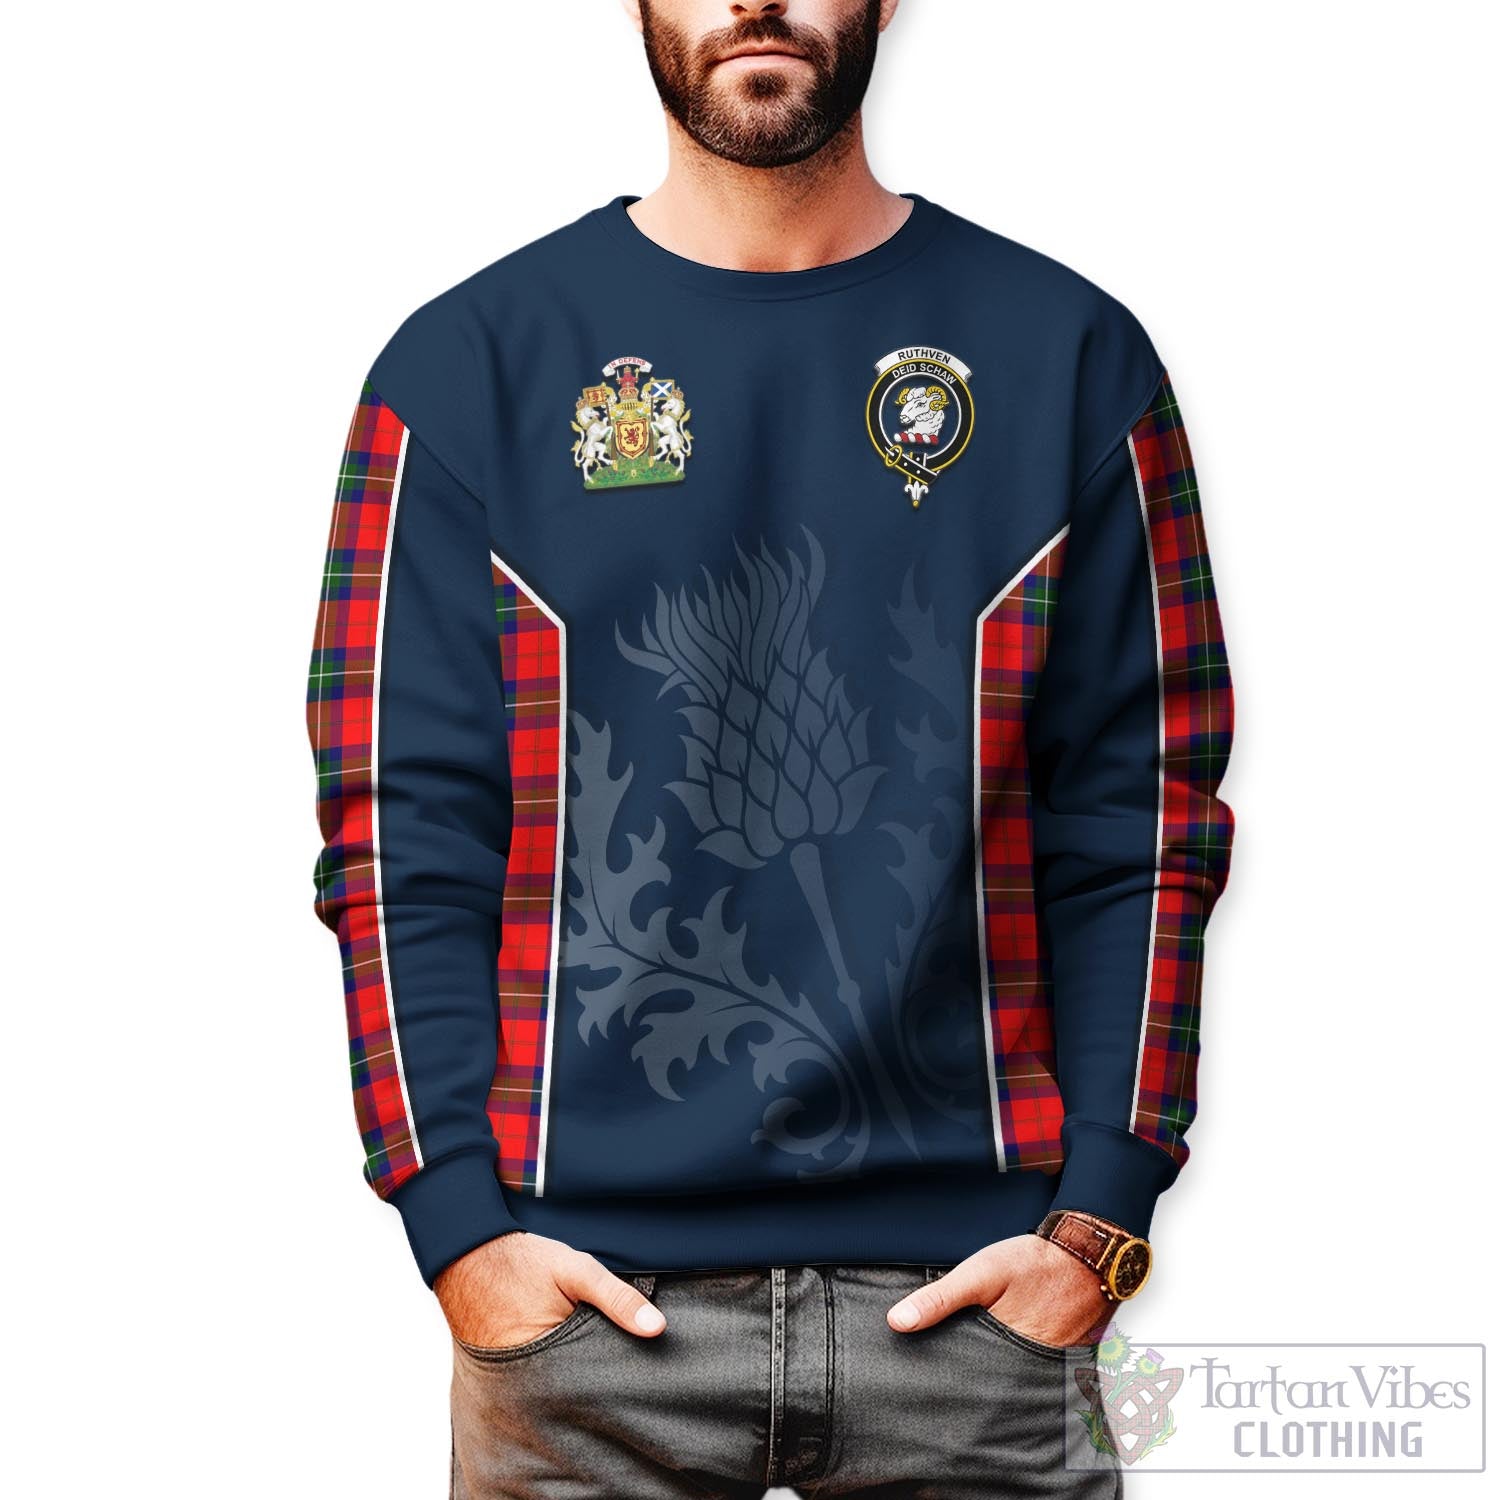 Tartan Vibes Clothing Ruthven Modern Tartan Sweatshirt with Family Crest and Scottish Thistle Vibes Sport Style